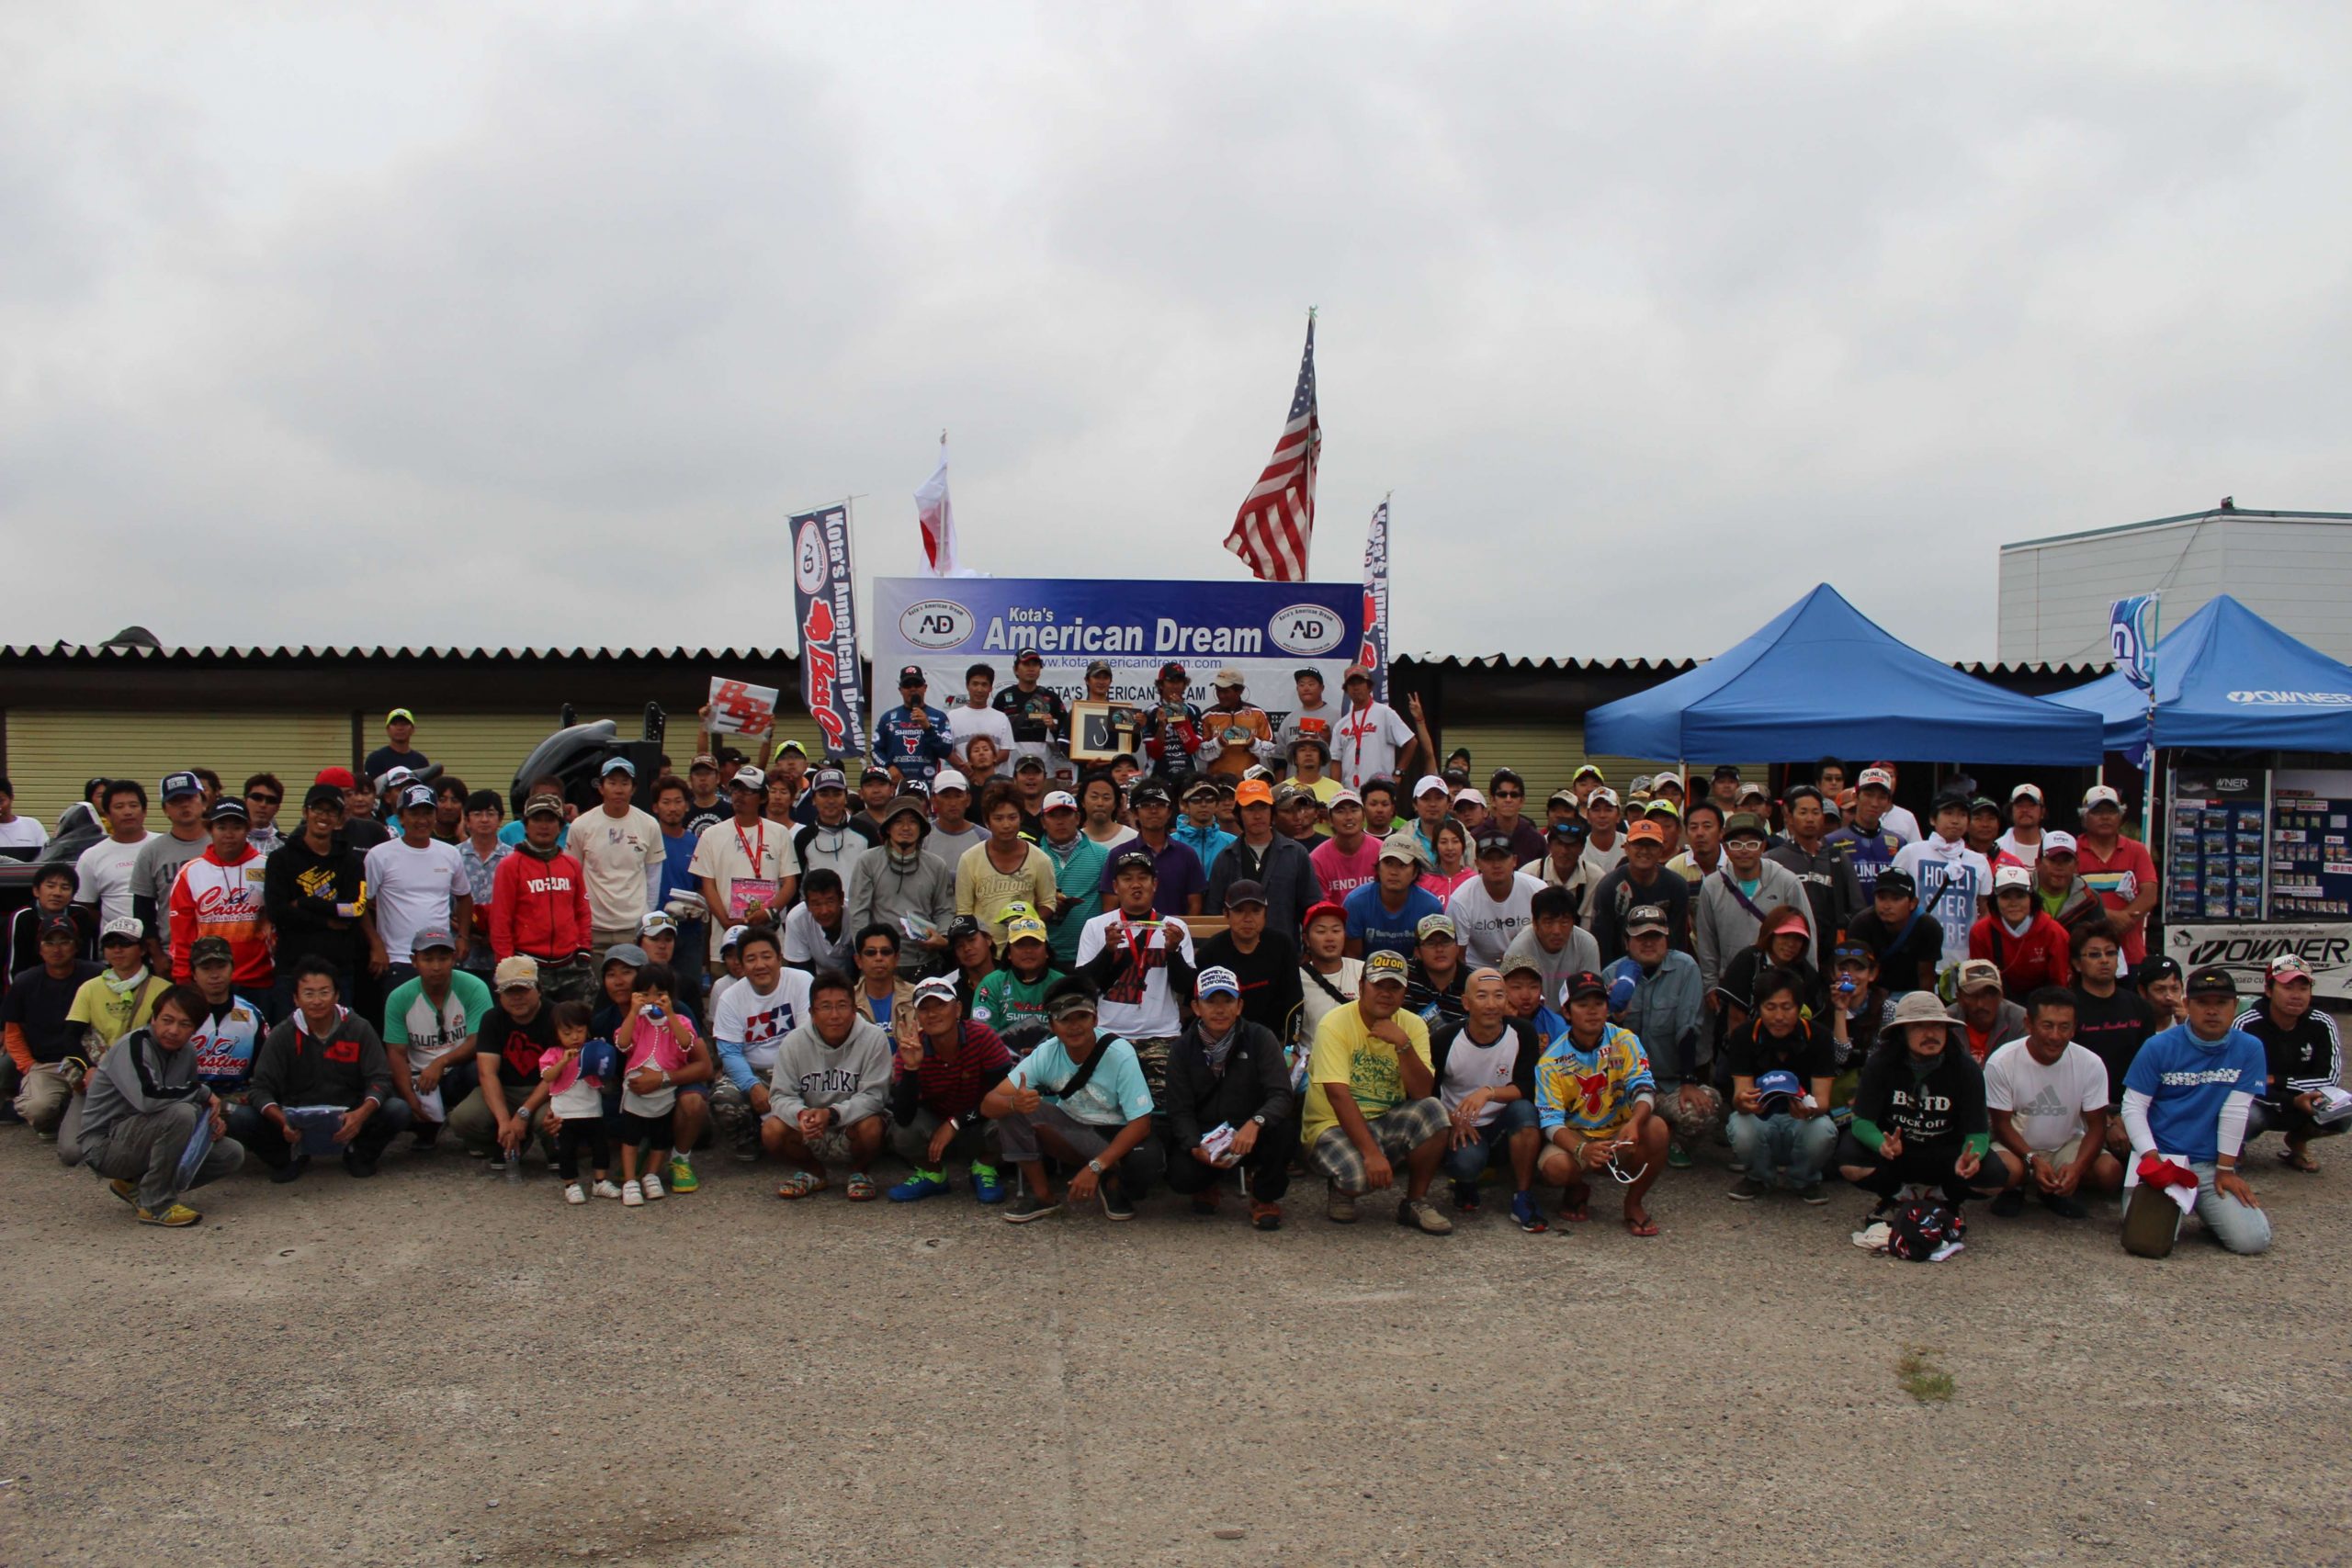 There were more than 160 people who fished the event which makes Kotaâs American Dream the largest open team tournament in Japan.